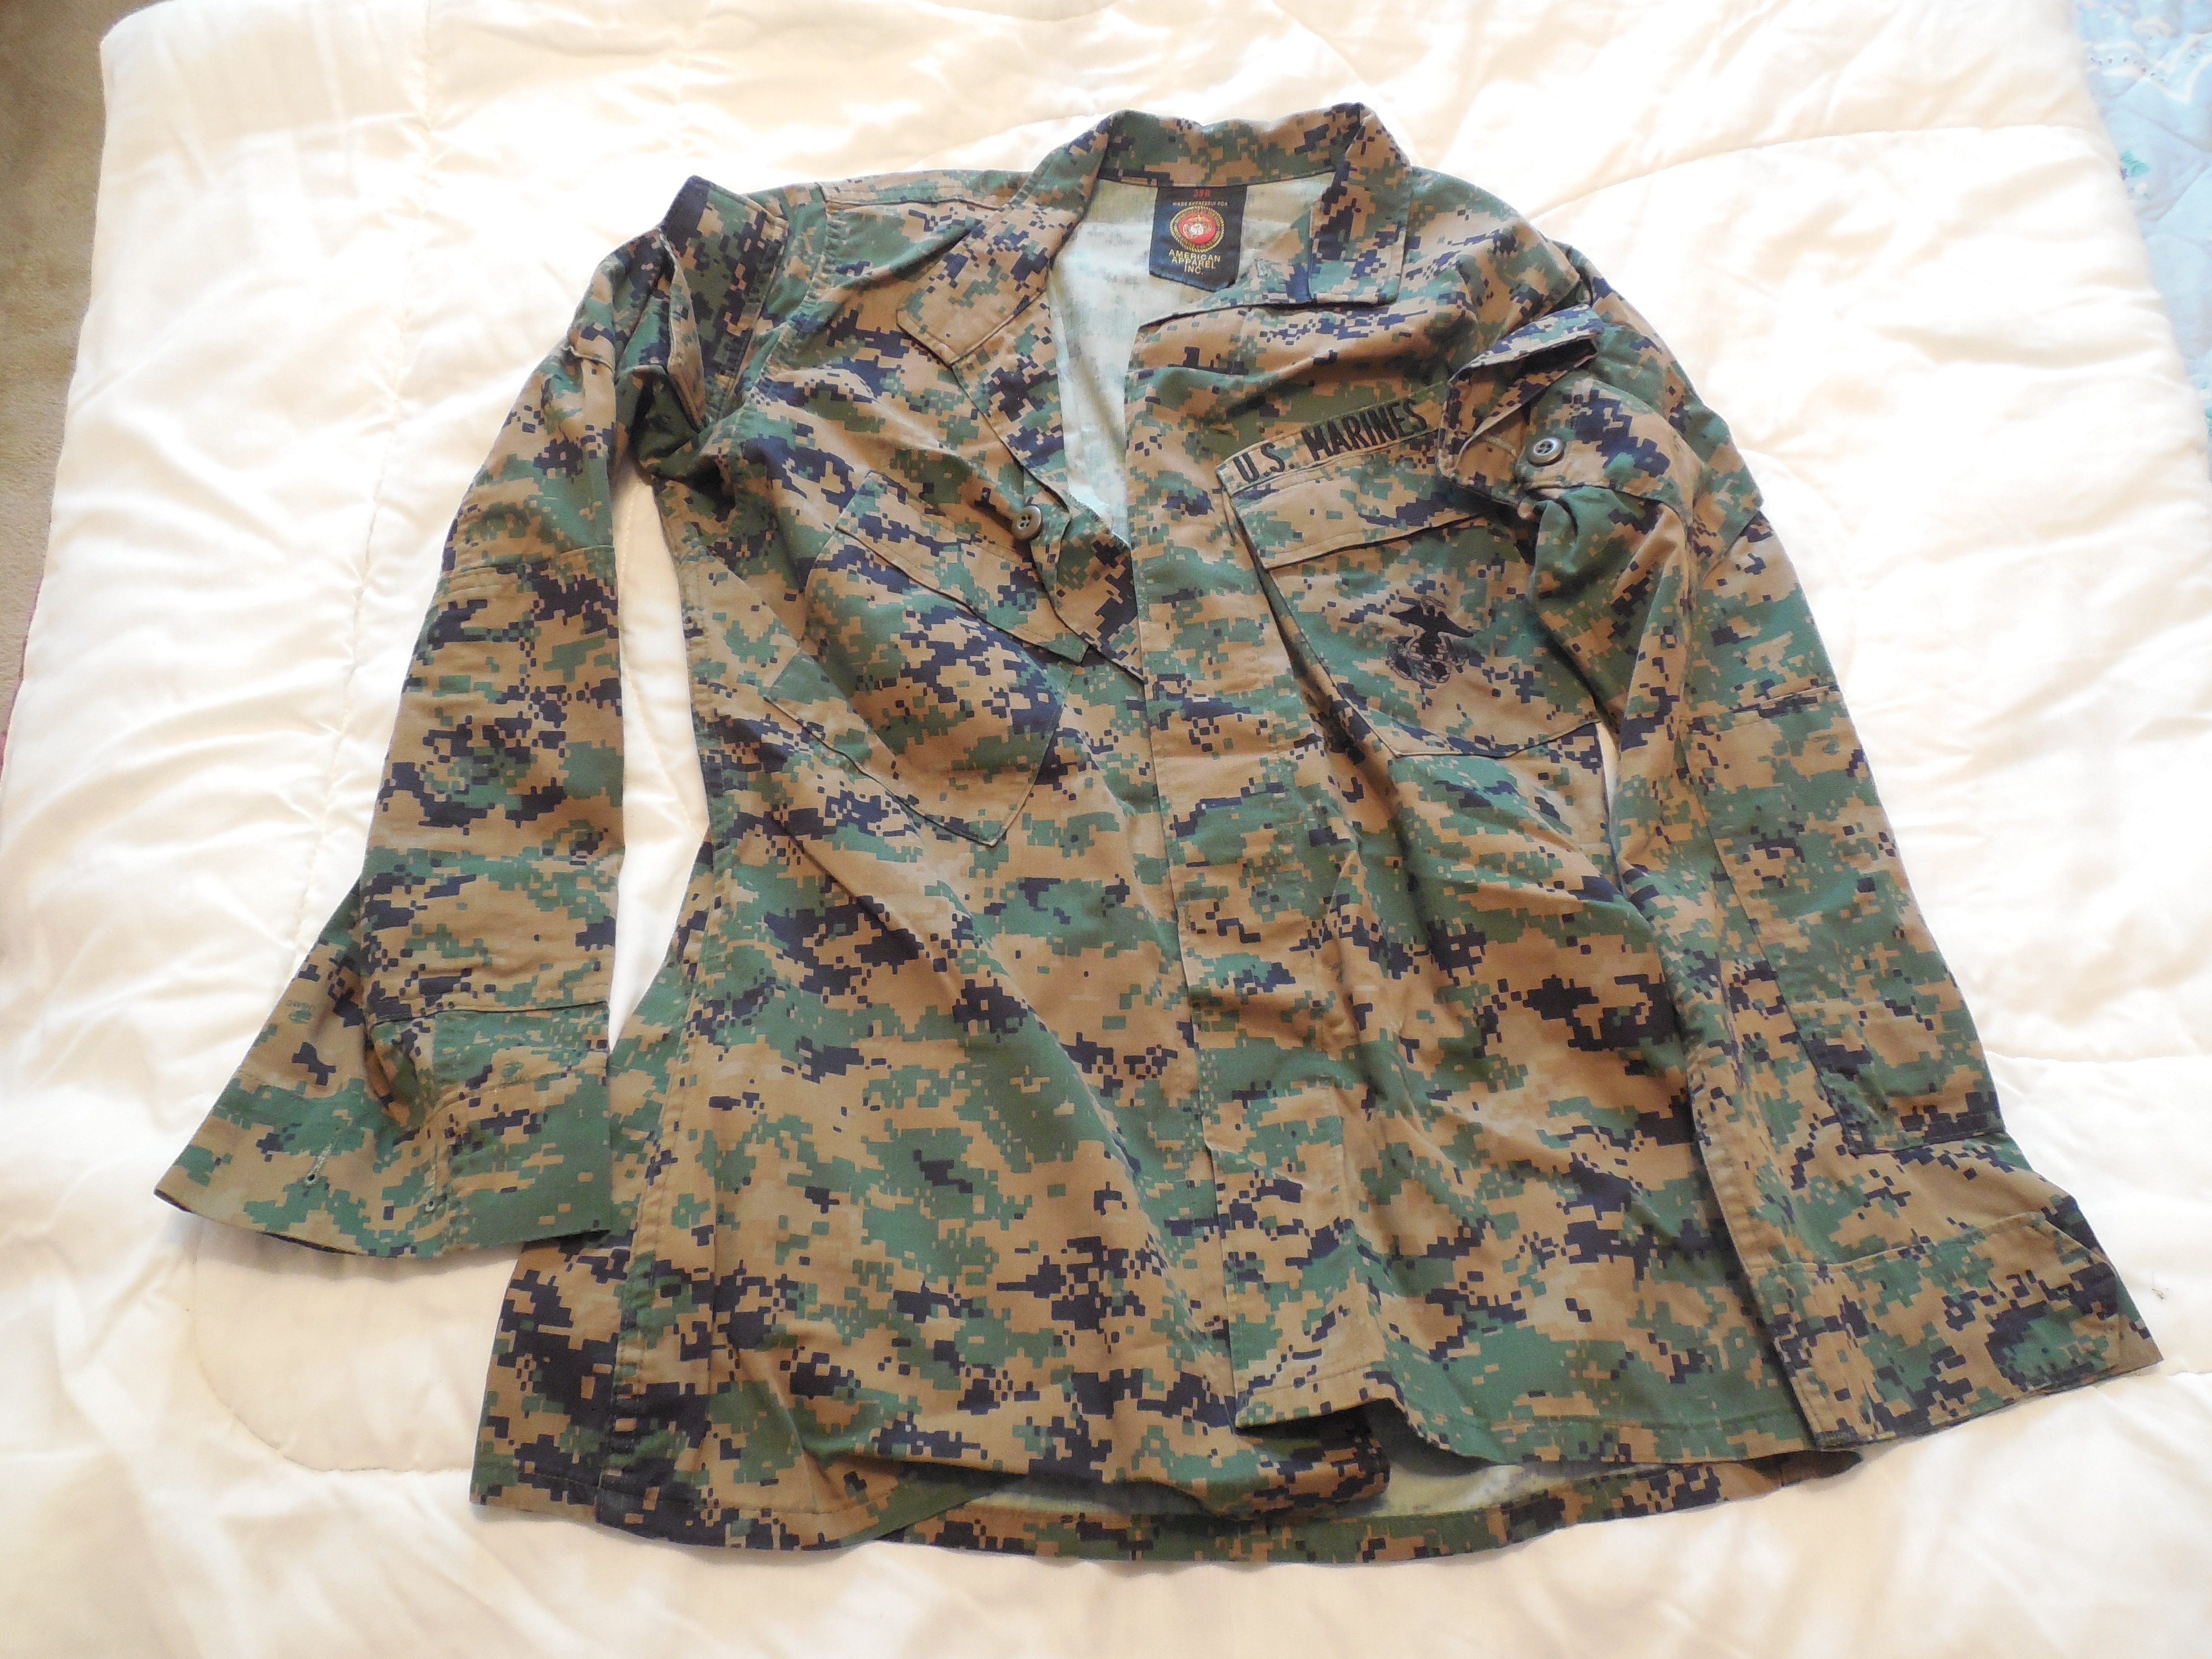 Store – B and M Military Surplus